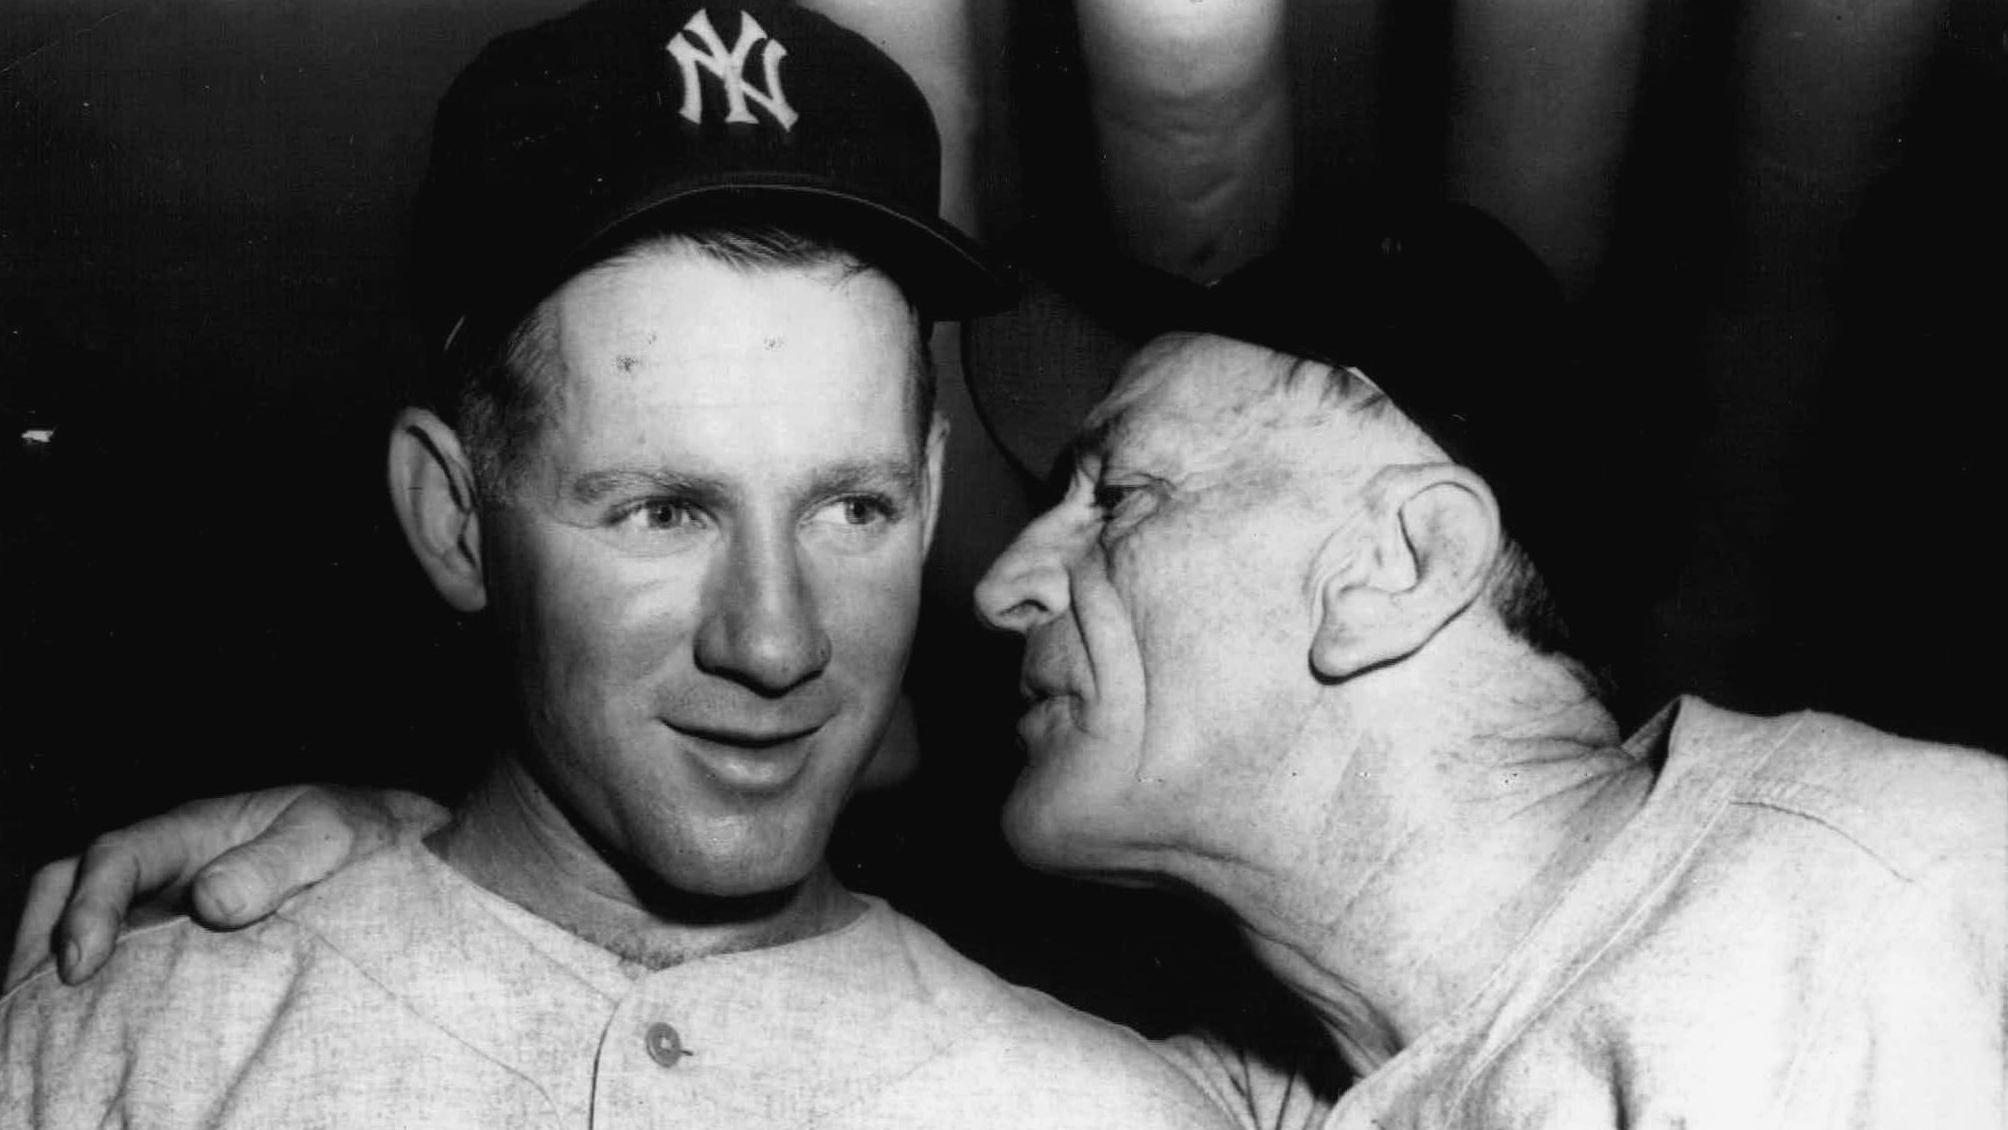 Whitey Ford, Beloved Yankees Pitcher Who Confounded Batters, Dies